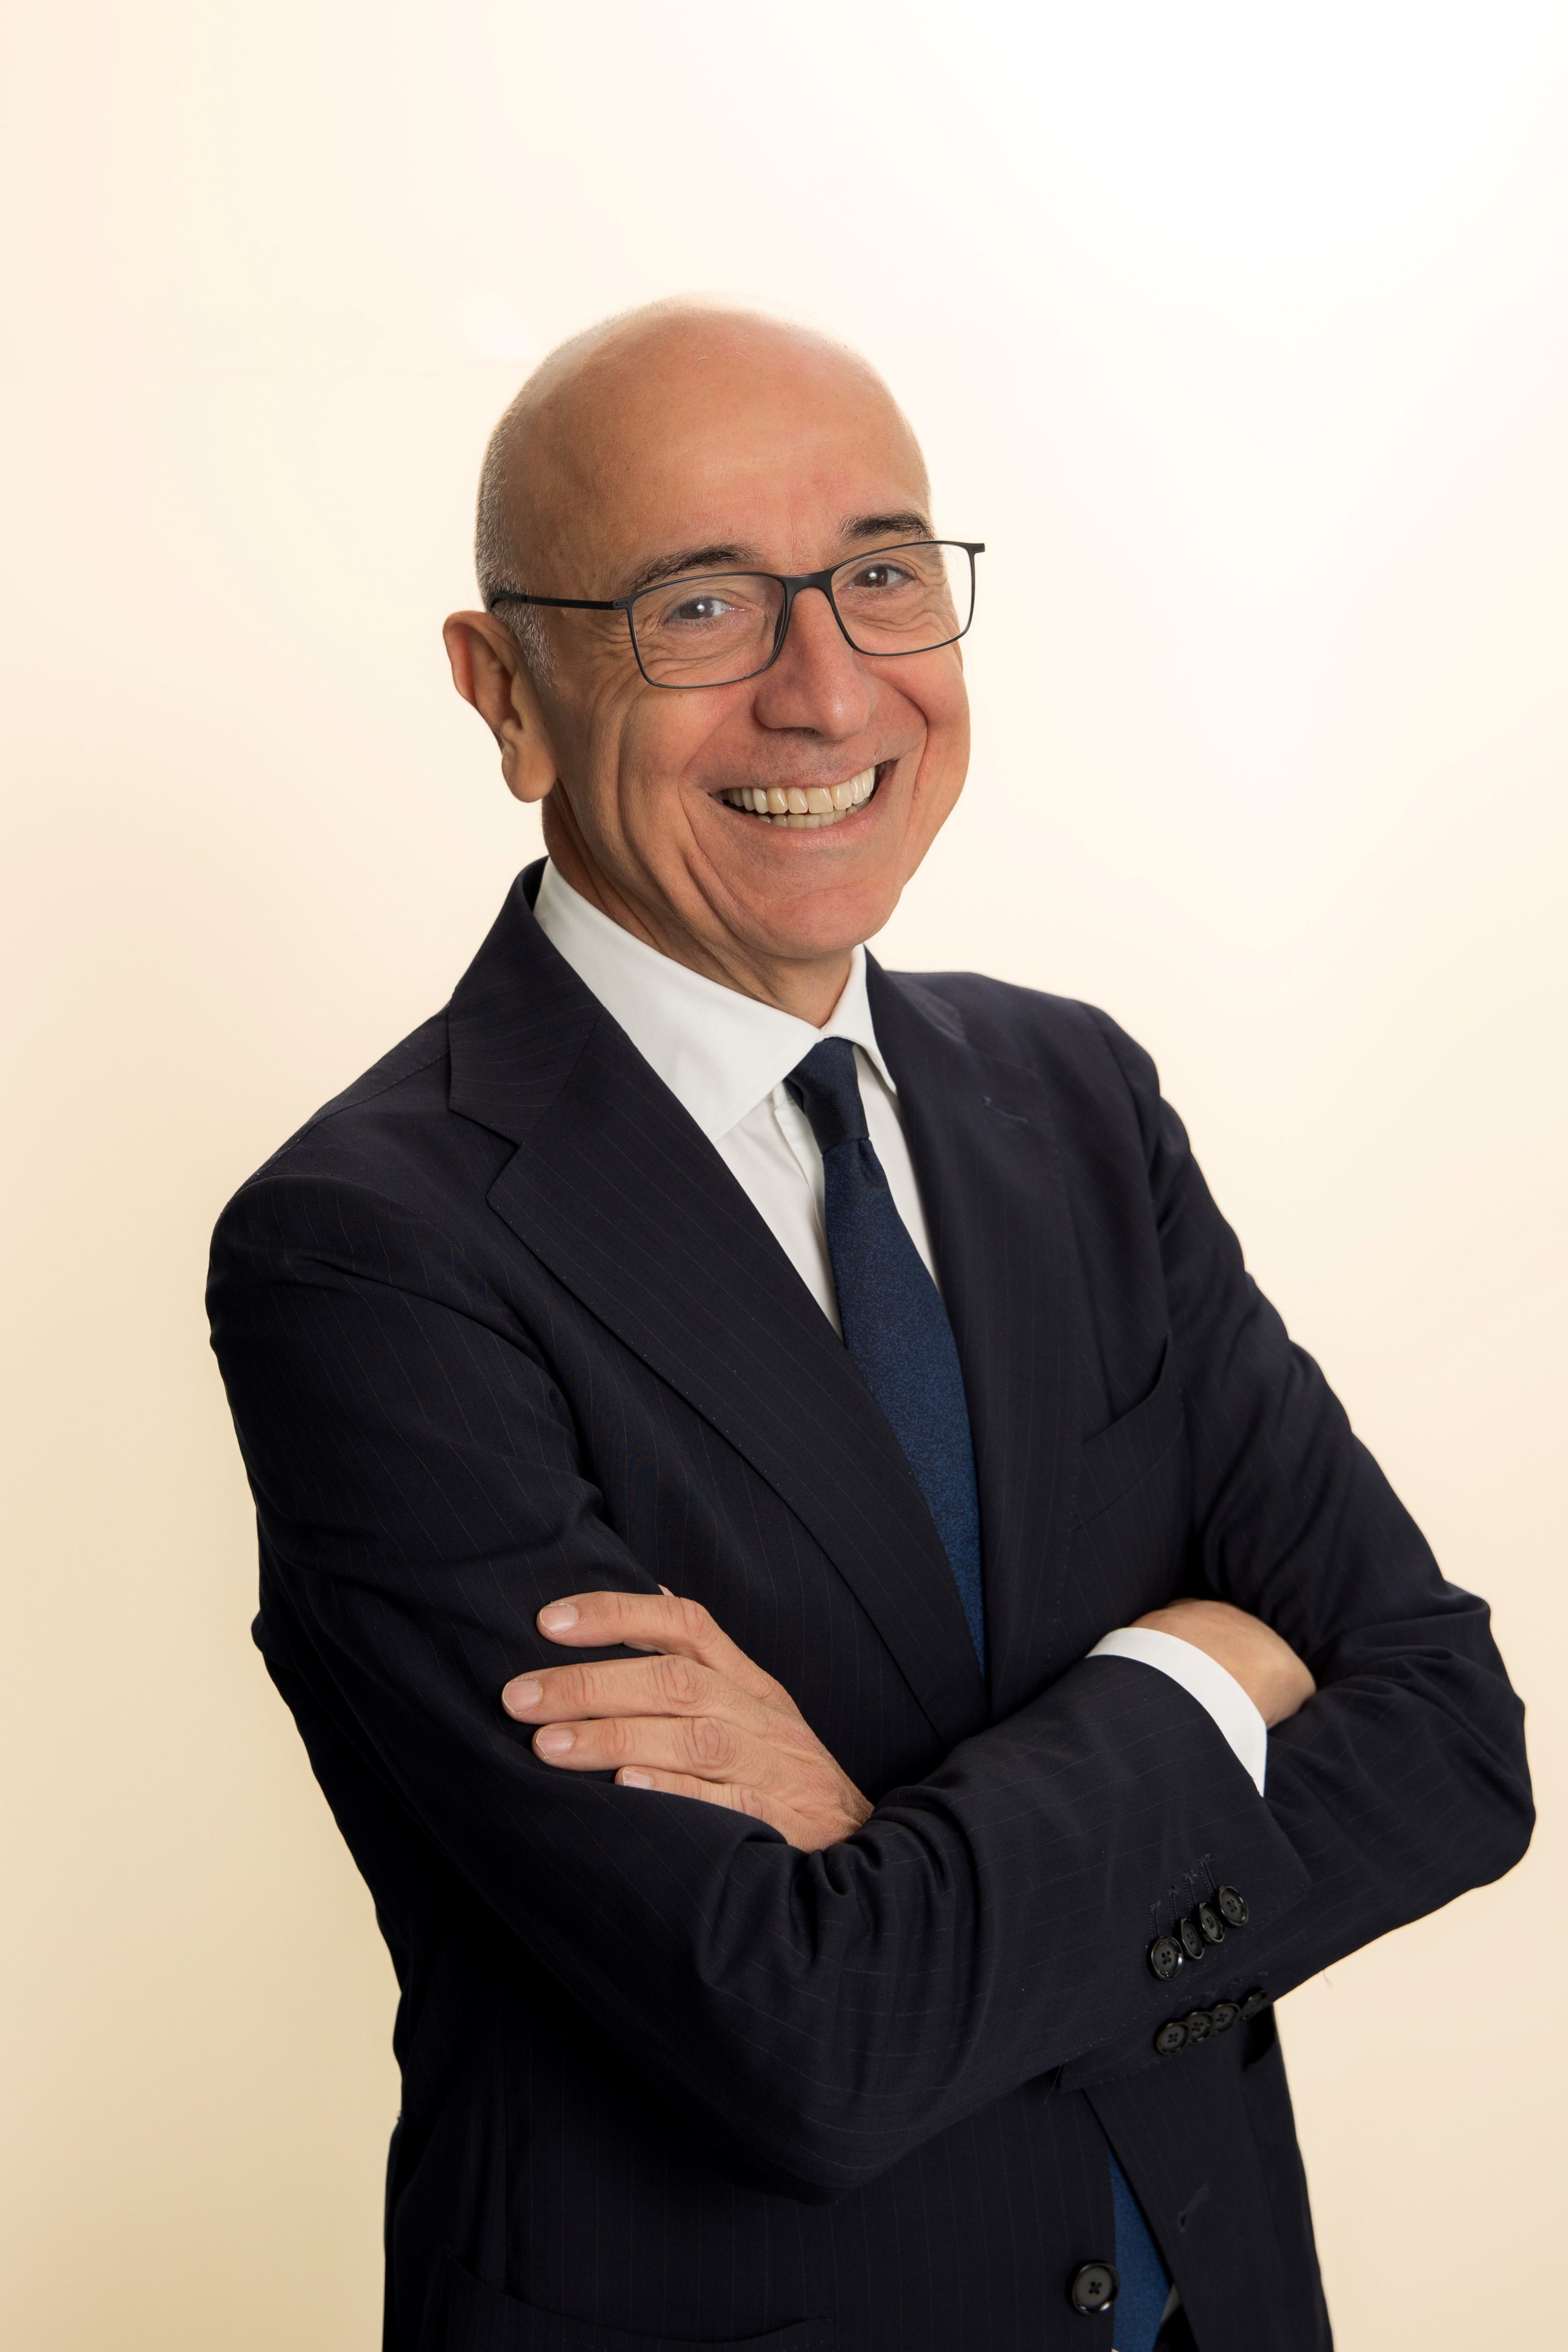 Petros Papanikolaou, who will succeed Joachim Müller as CEO of Allianz Global Corporate & Specialty SE with effect from January 1, 2024